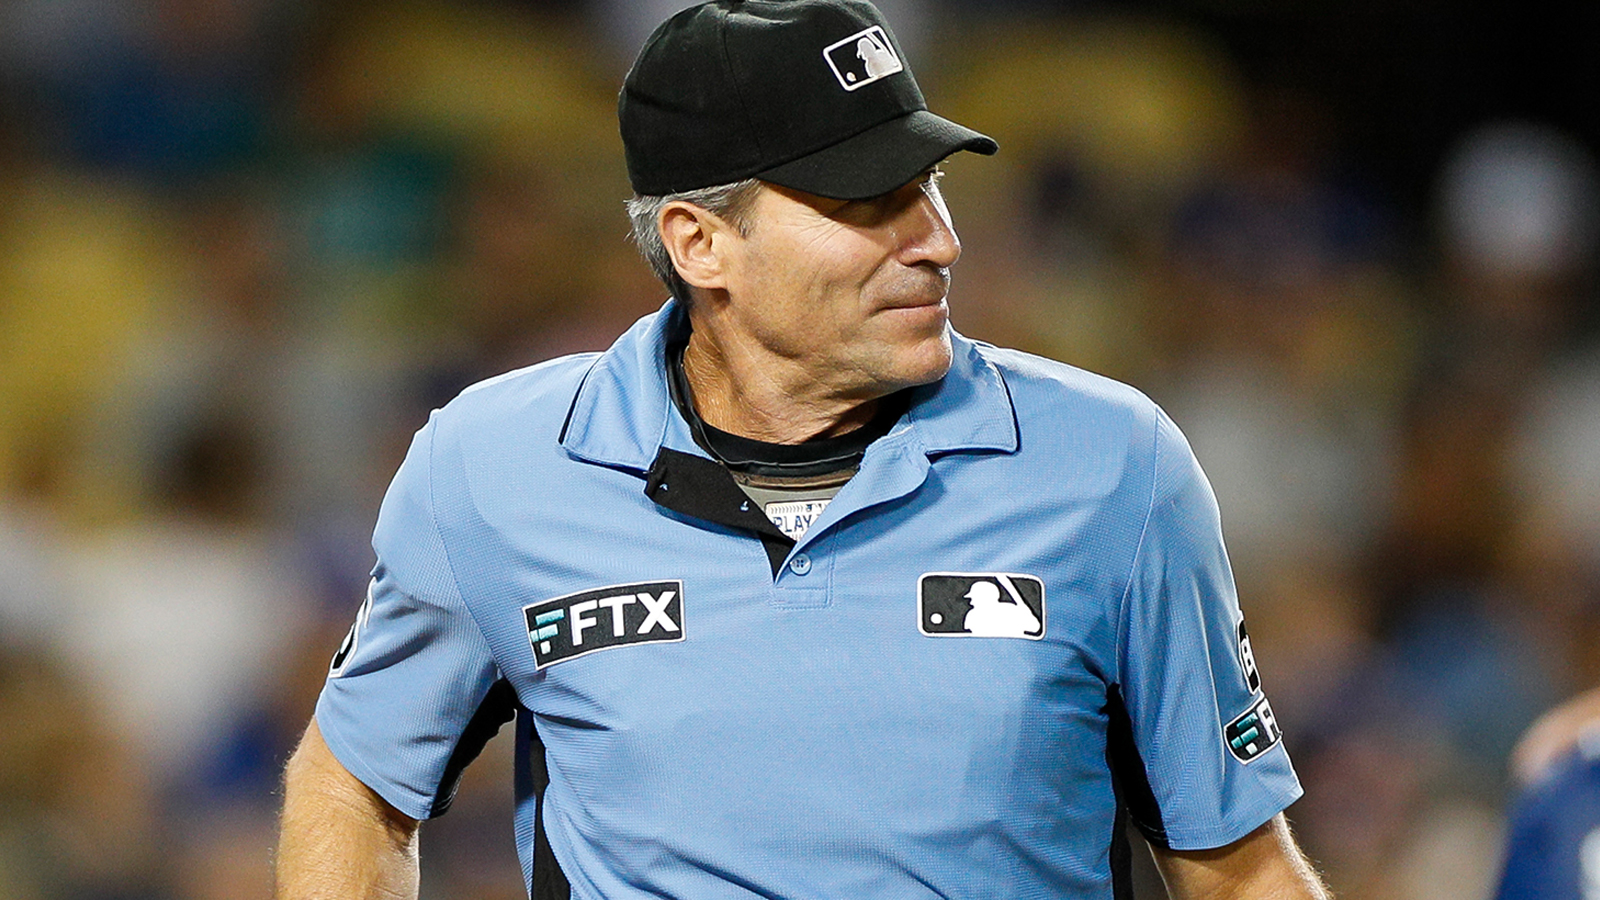 Angel Hernandez is the Worst Umpire in MLB History